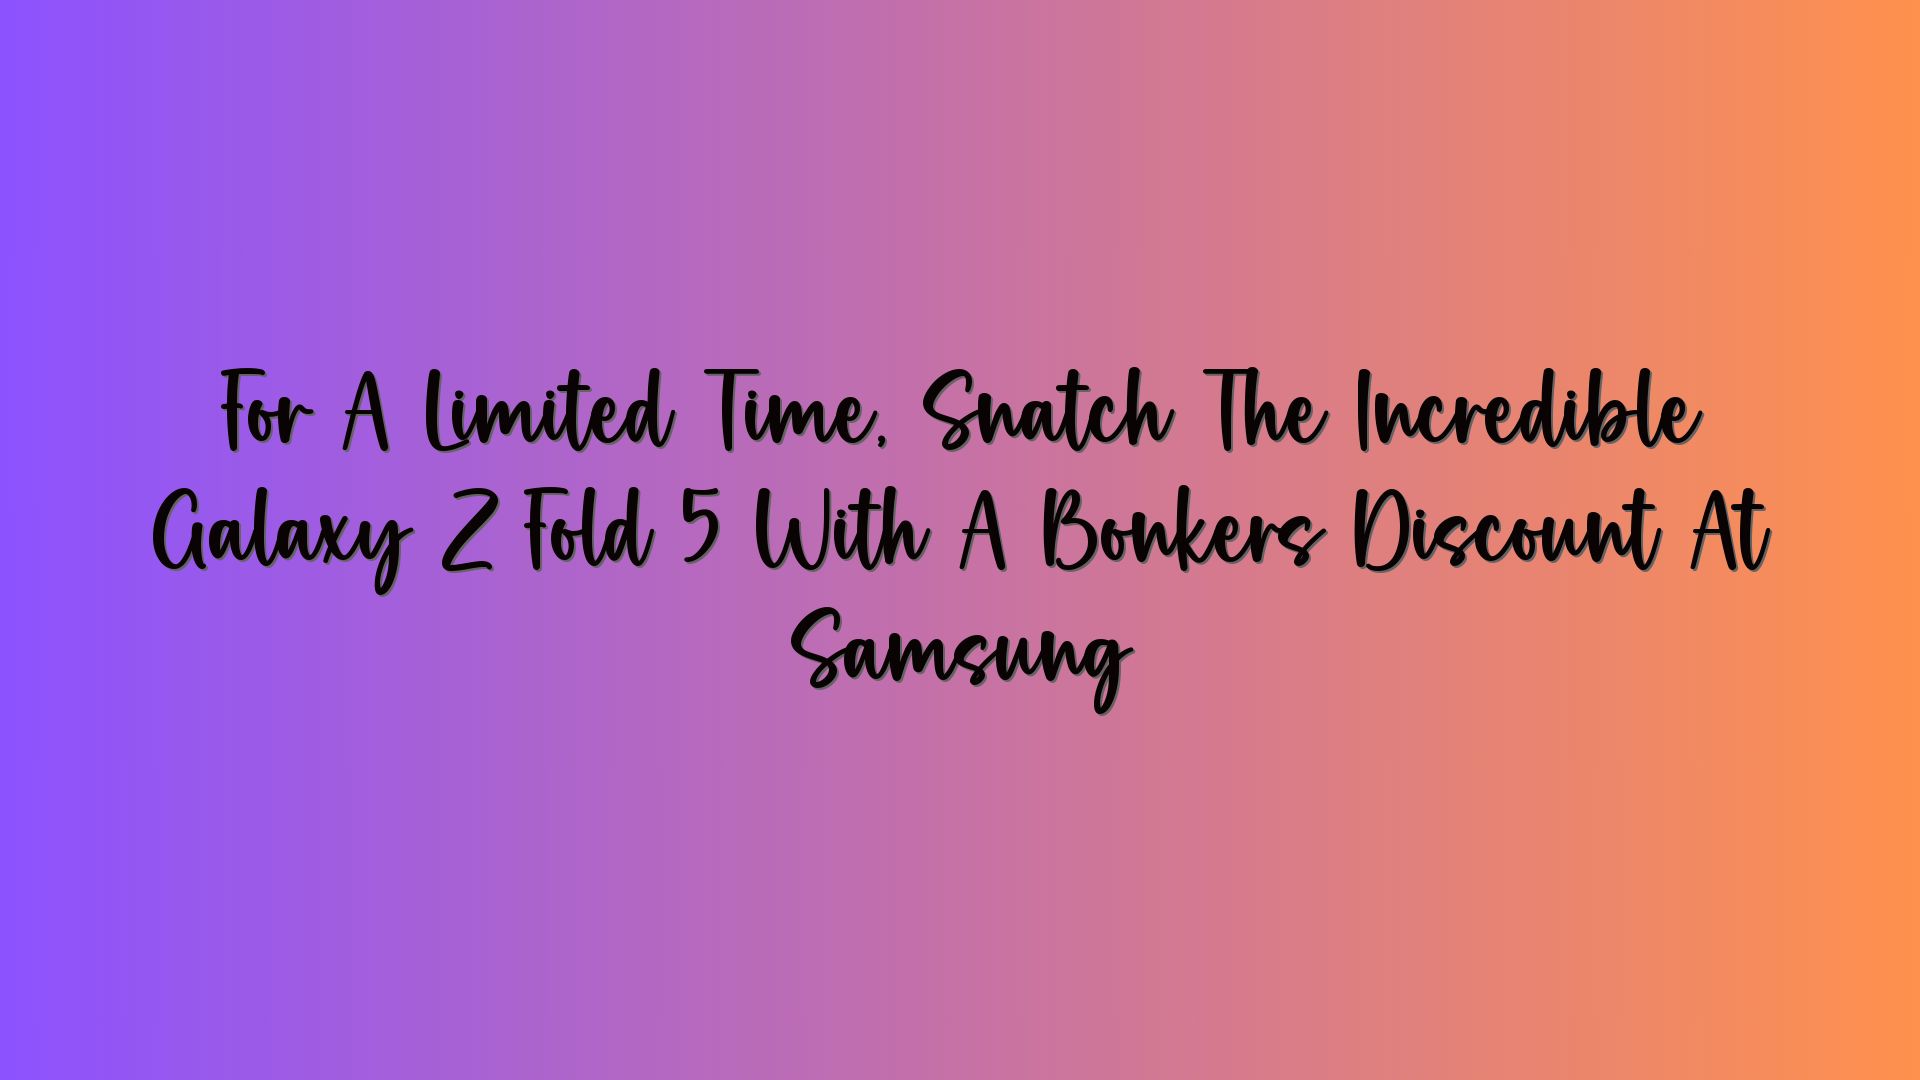 For A Limited Time, Snatch The Incredible Galaxy Z Fold 5 With A Bonkers Discount At Samsung